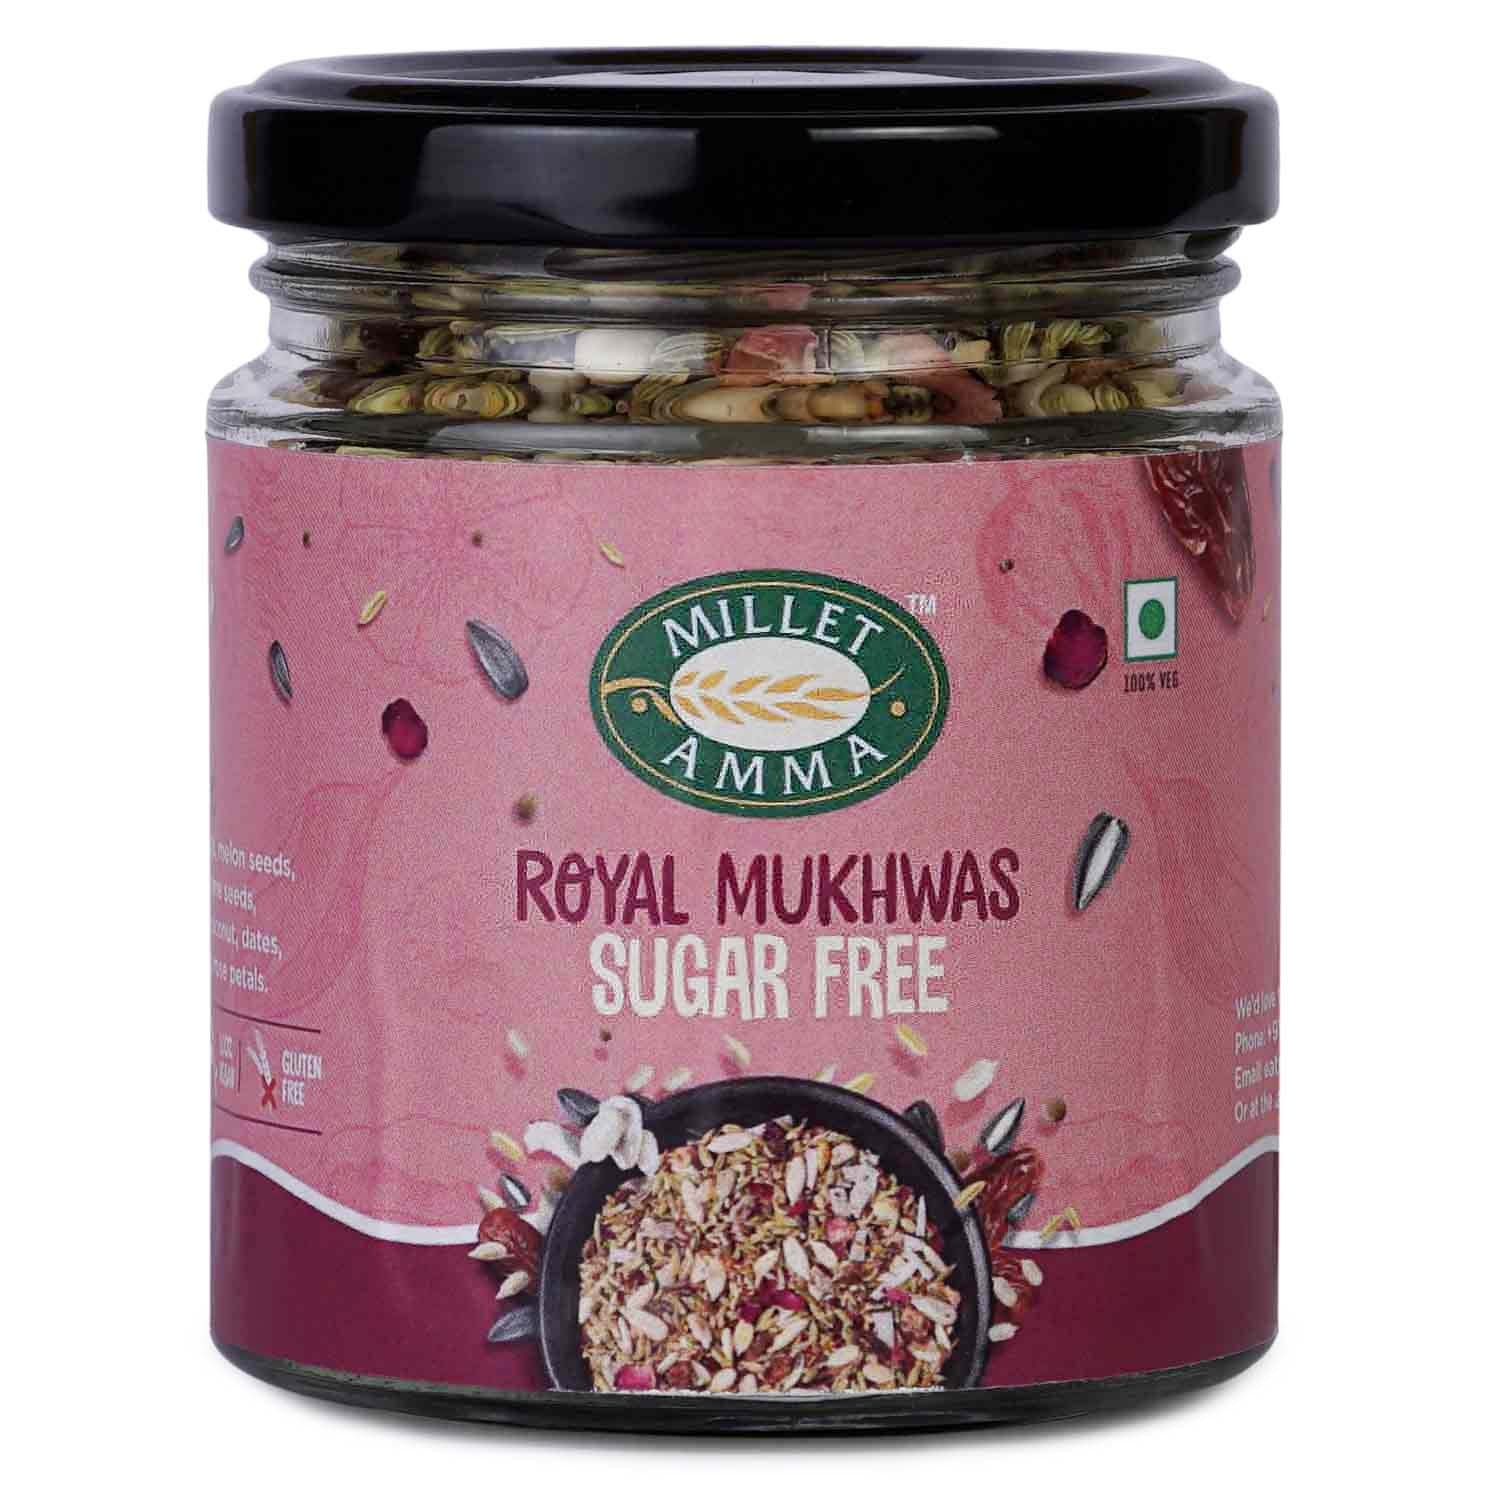 Millet Amma’s Royal Mukhwas Sugarfree- This nutritious Royal Mukhwas Sugarfree is a mixture of healthy seeds that help improve digestion.  Made from Sunflower Seeds, Melon Seeds and Flaxseeds, it is loaded with antioxidants that your body requires. The sugar free mukhwas is sweetened using dates.